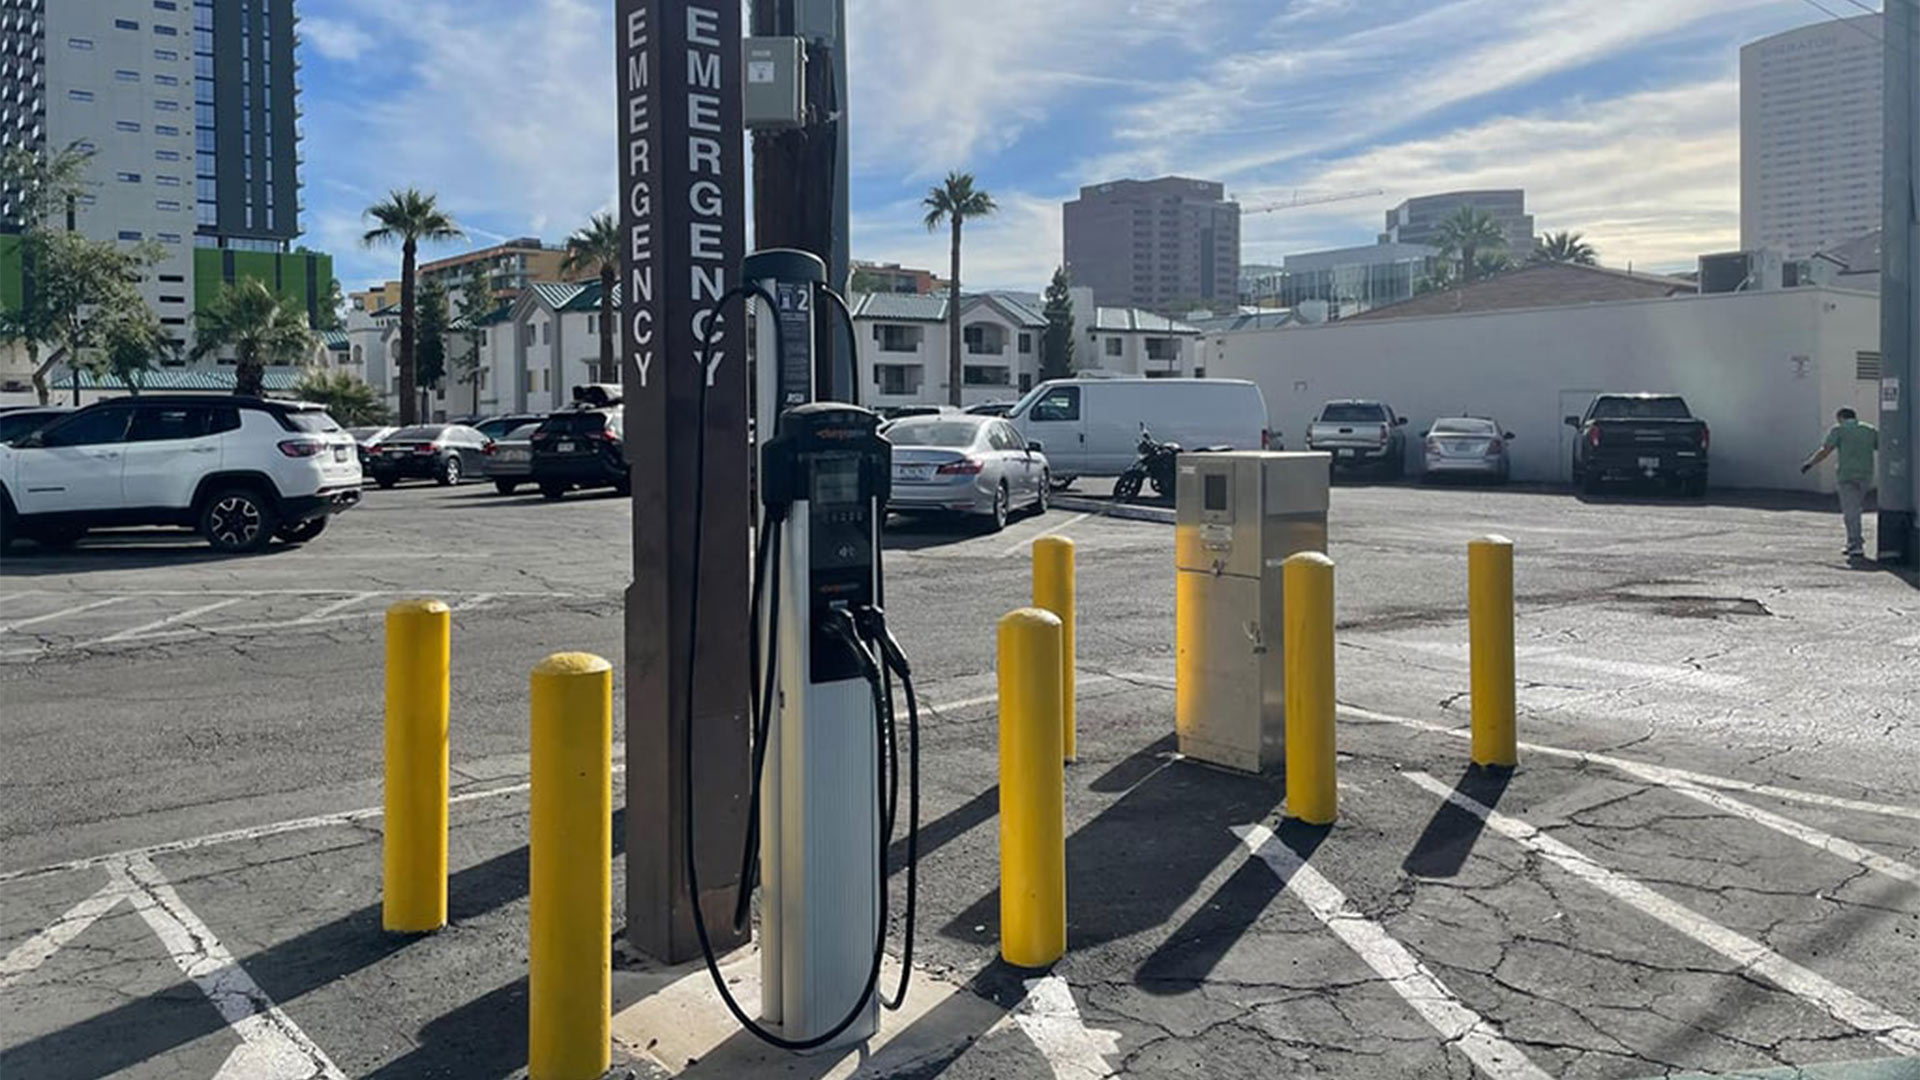 More electric-vehicle charging ports will be installed along interstate highways in Arizona as early as 2024